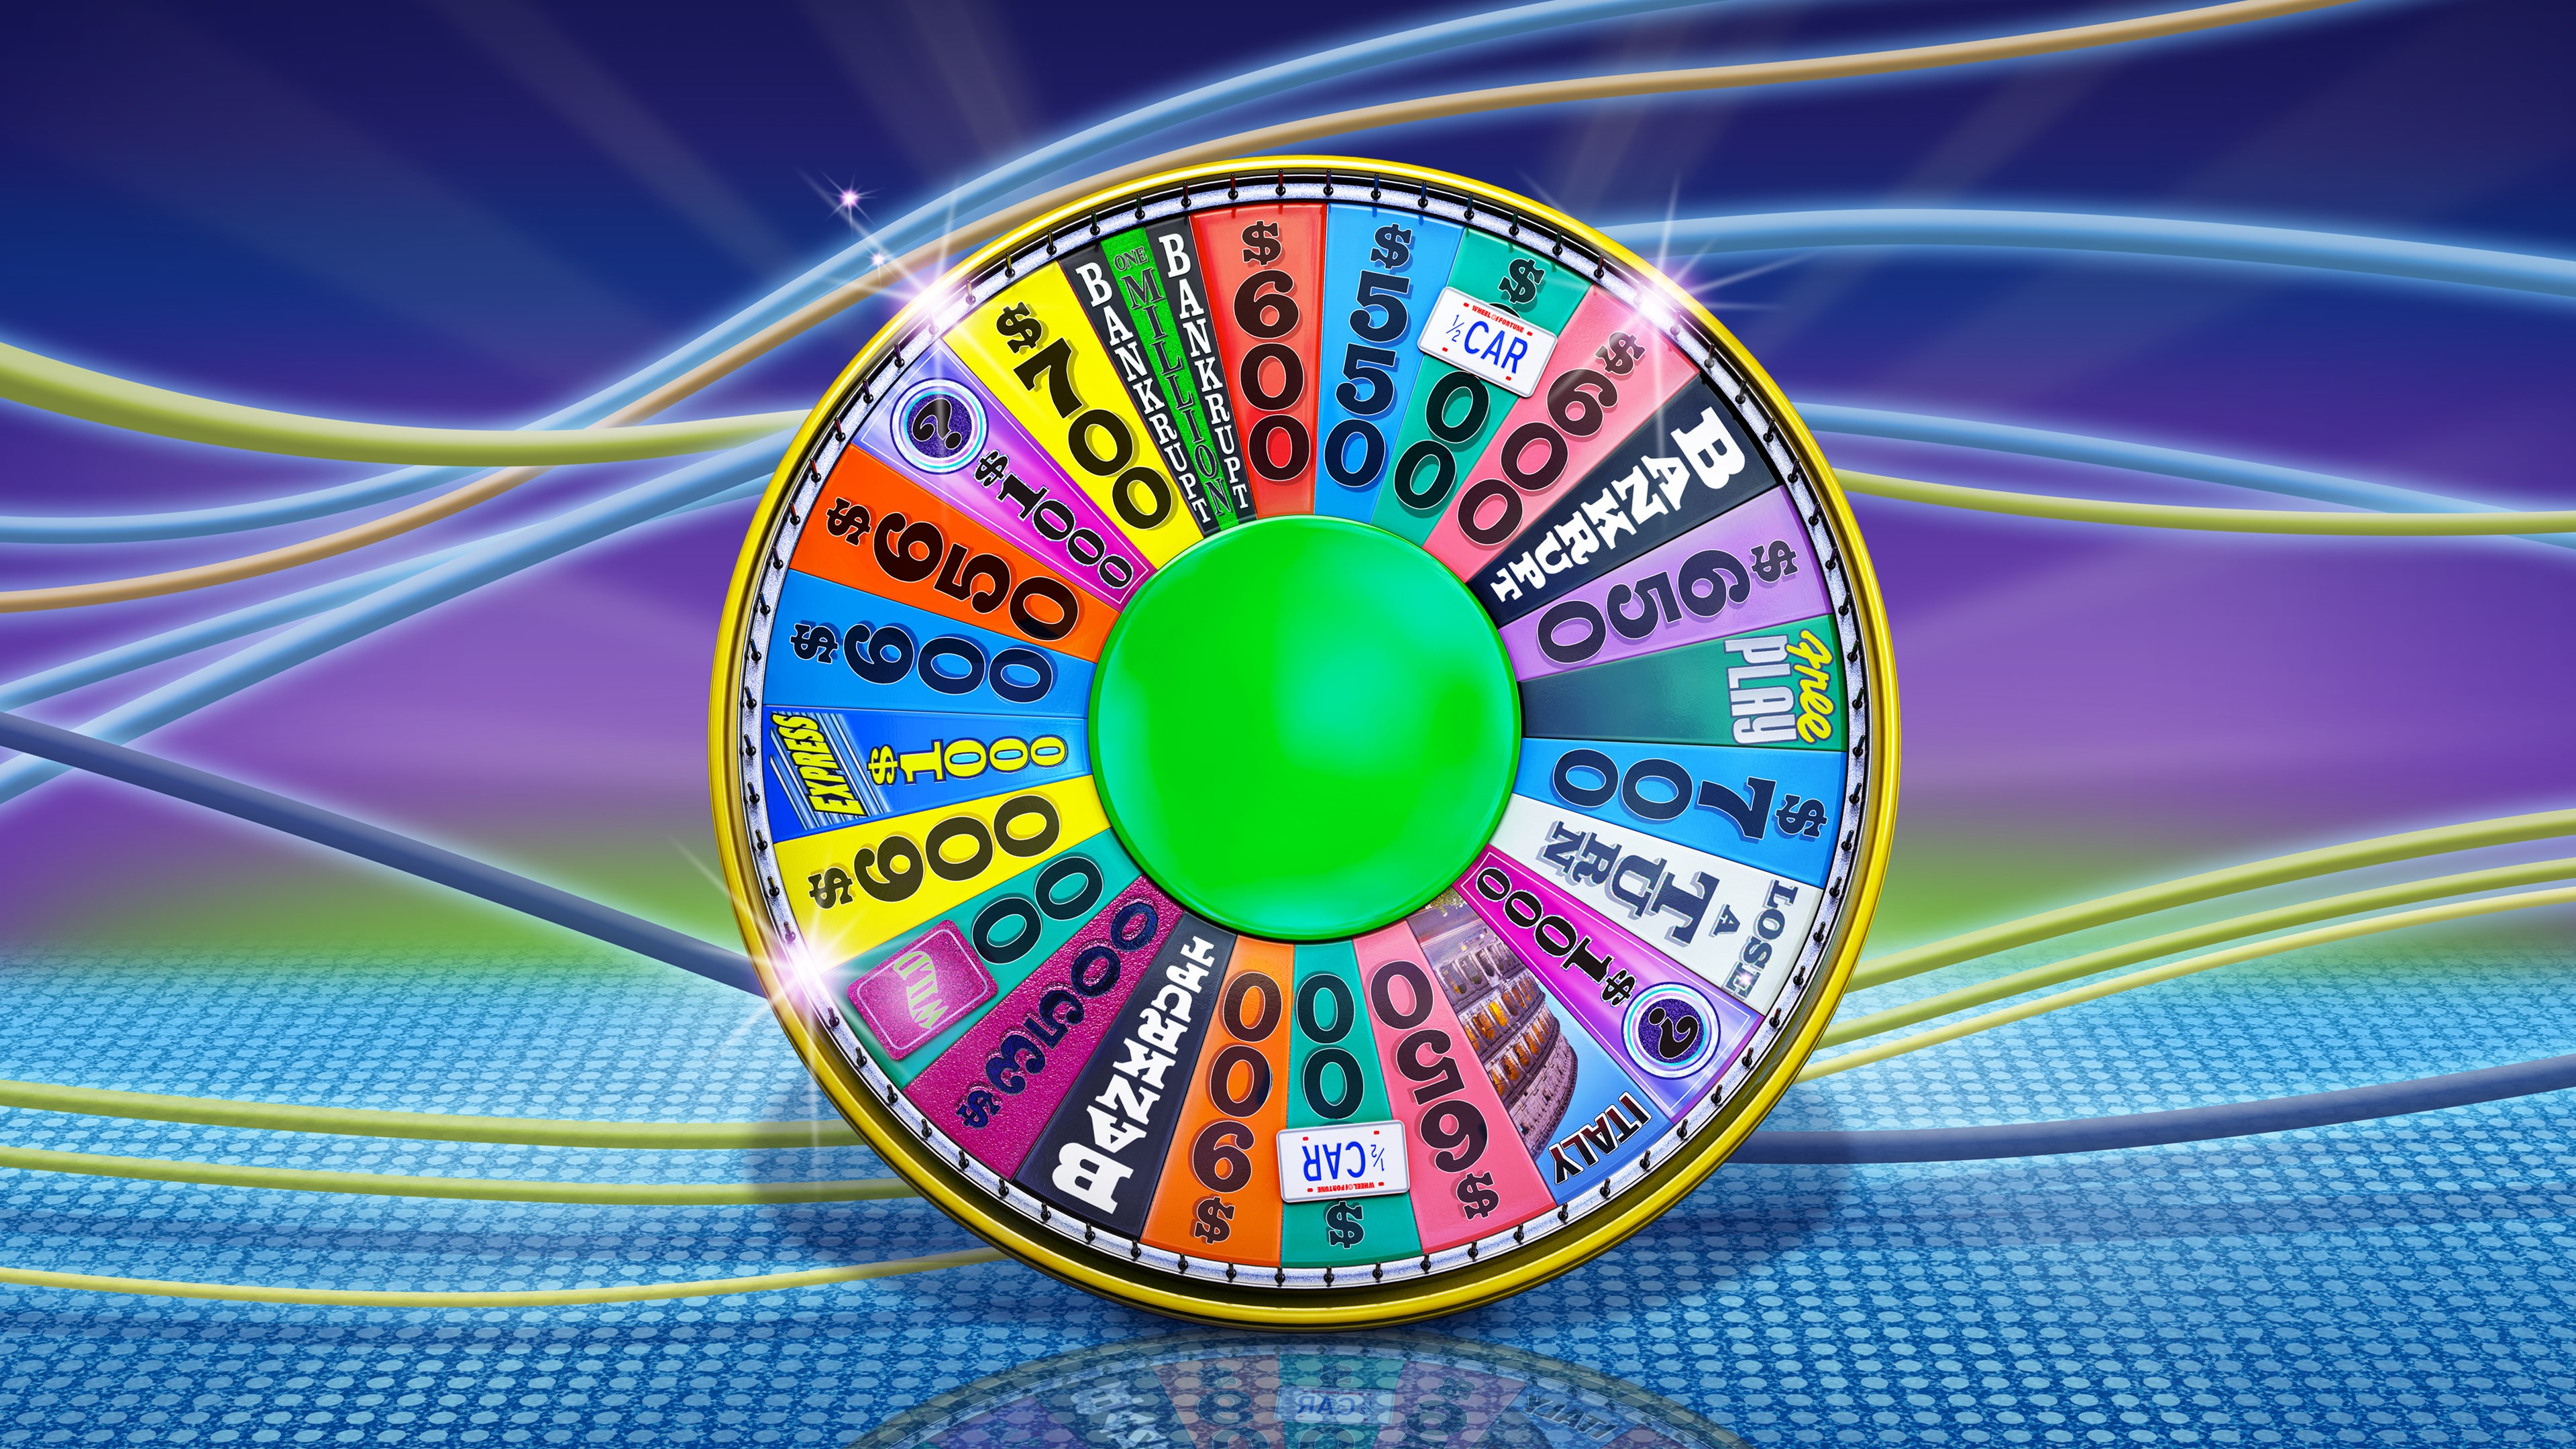 wheel of fortune xbox one digital download